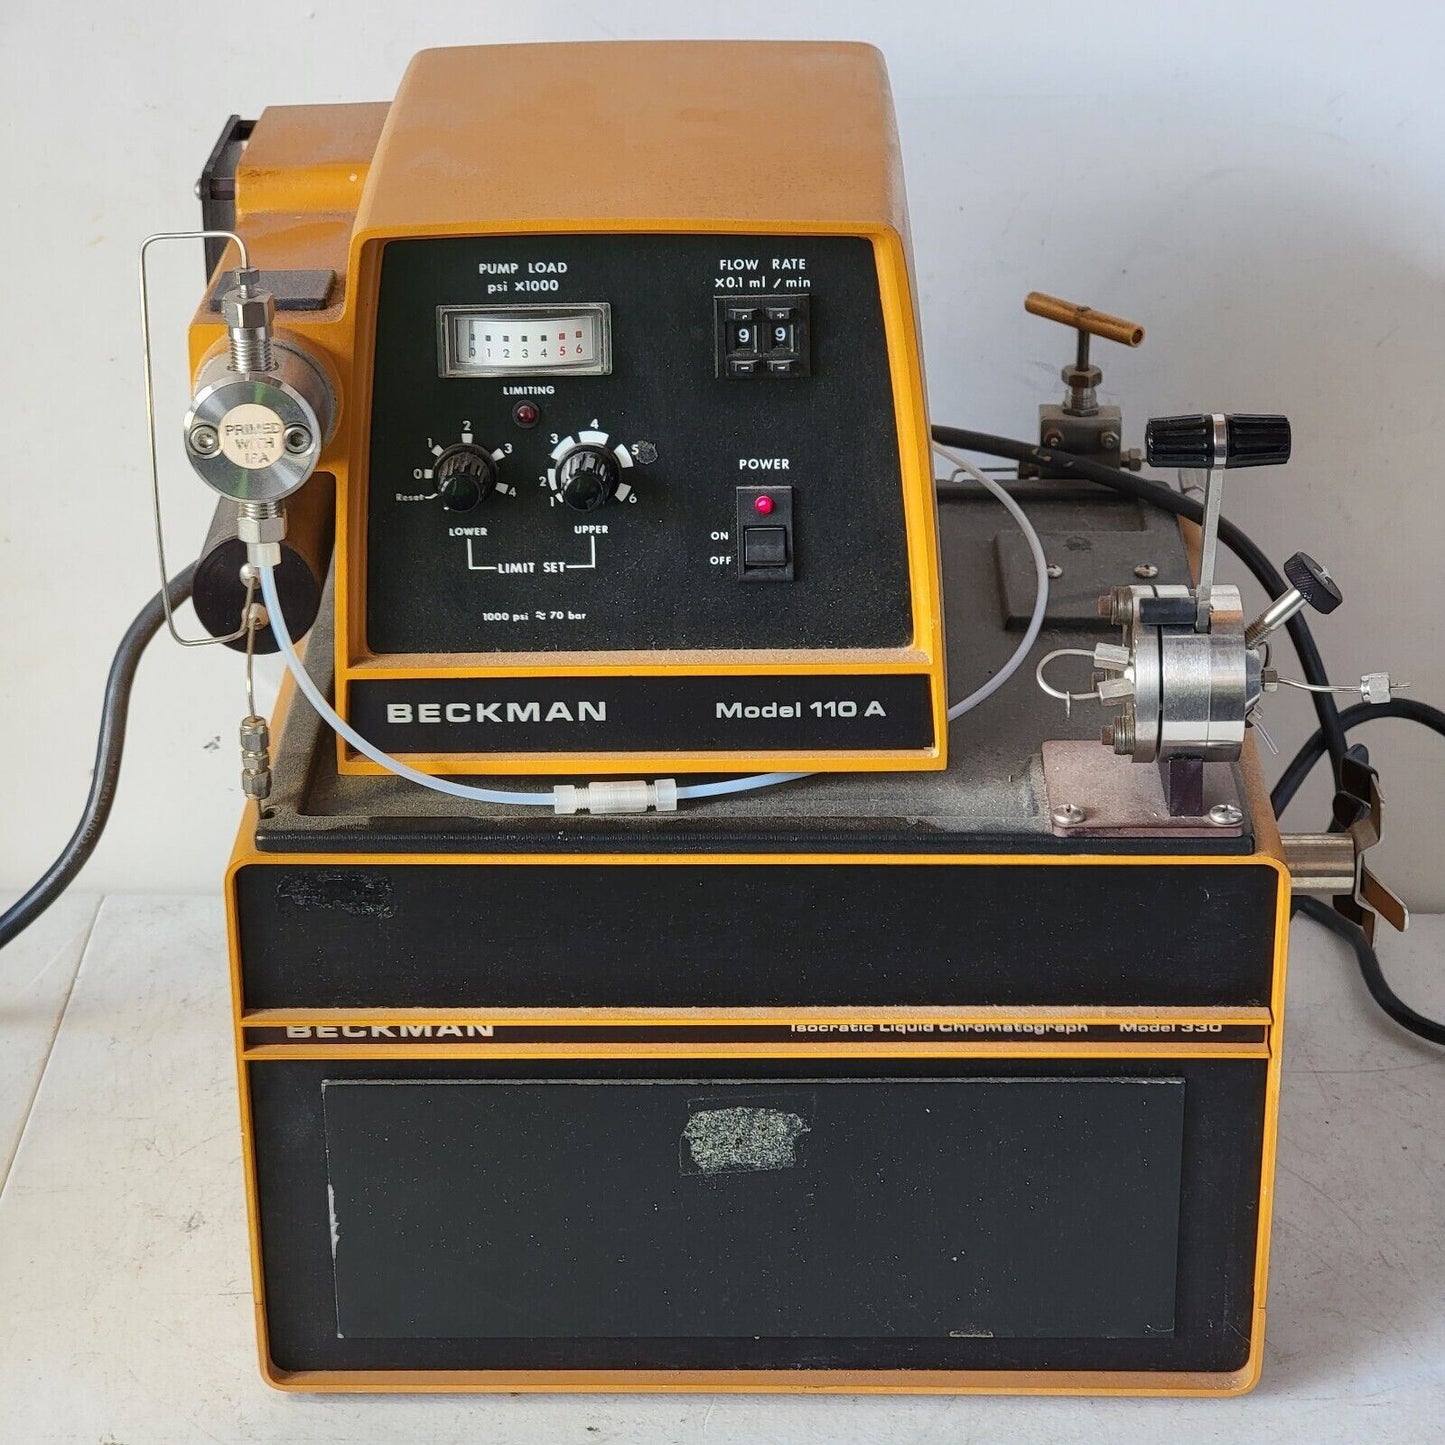 Beckman 330 Liquid Chromatography Pump and Power Supply 110 w/ Manual Injector